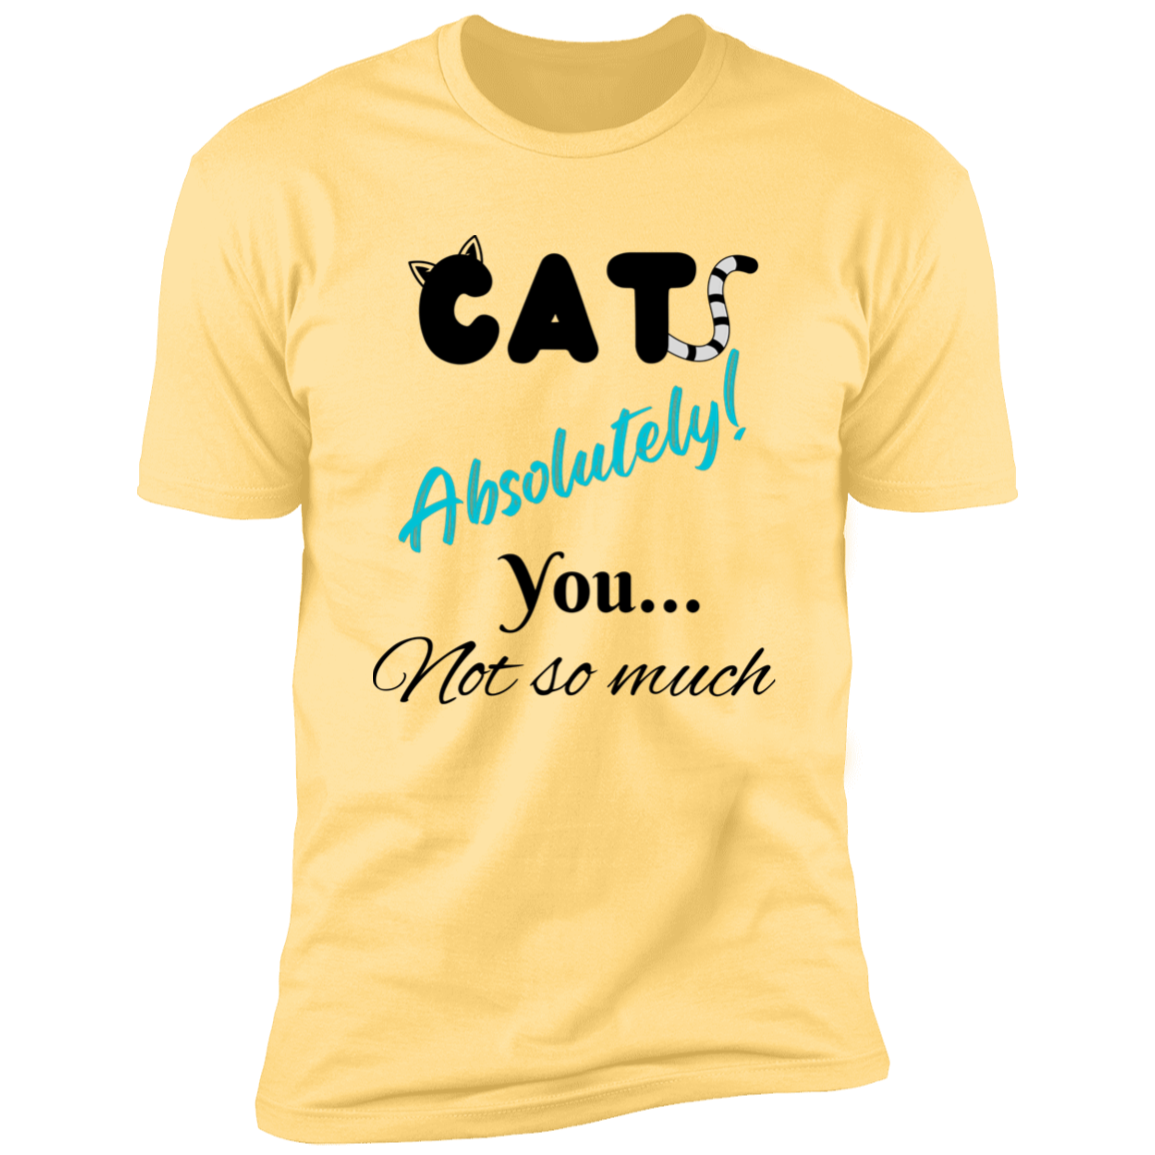 Cats Absolutely You Not So Much T-shirt, Cat Shirt for humans , in banana cream